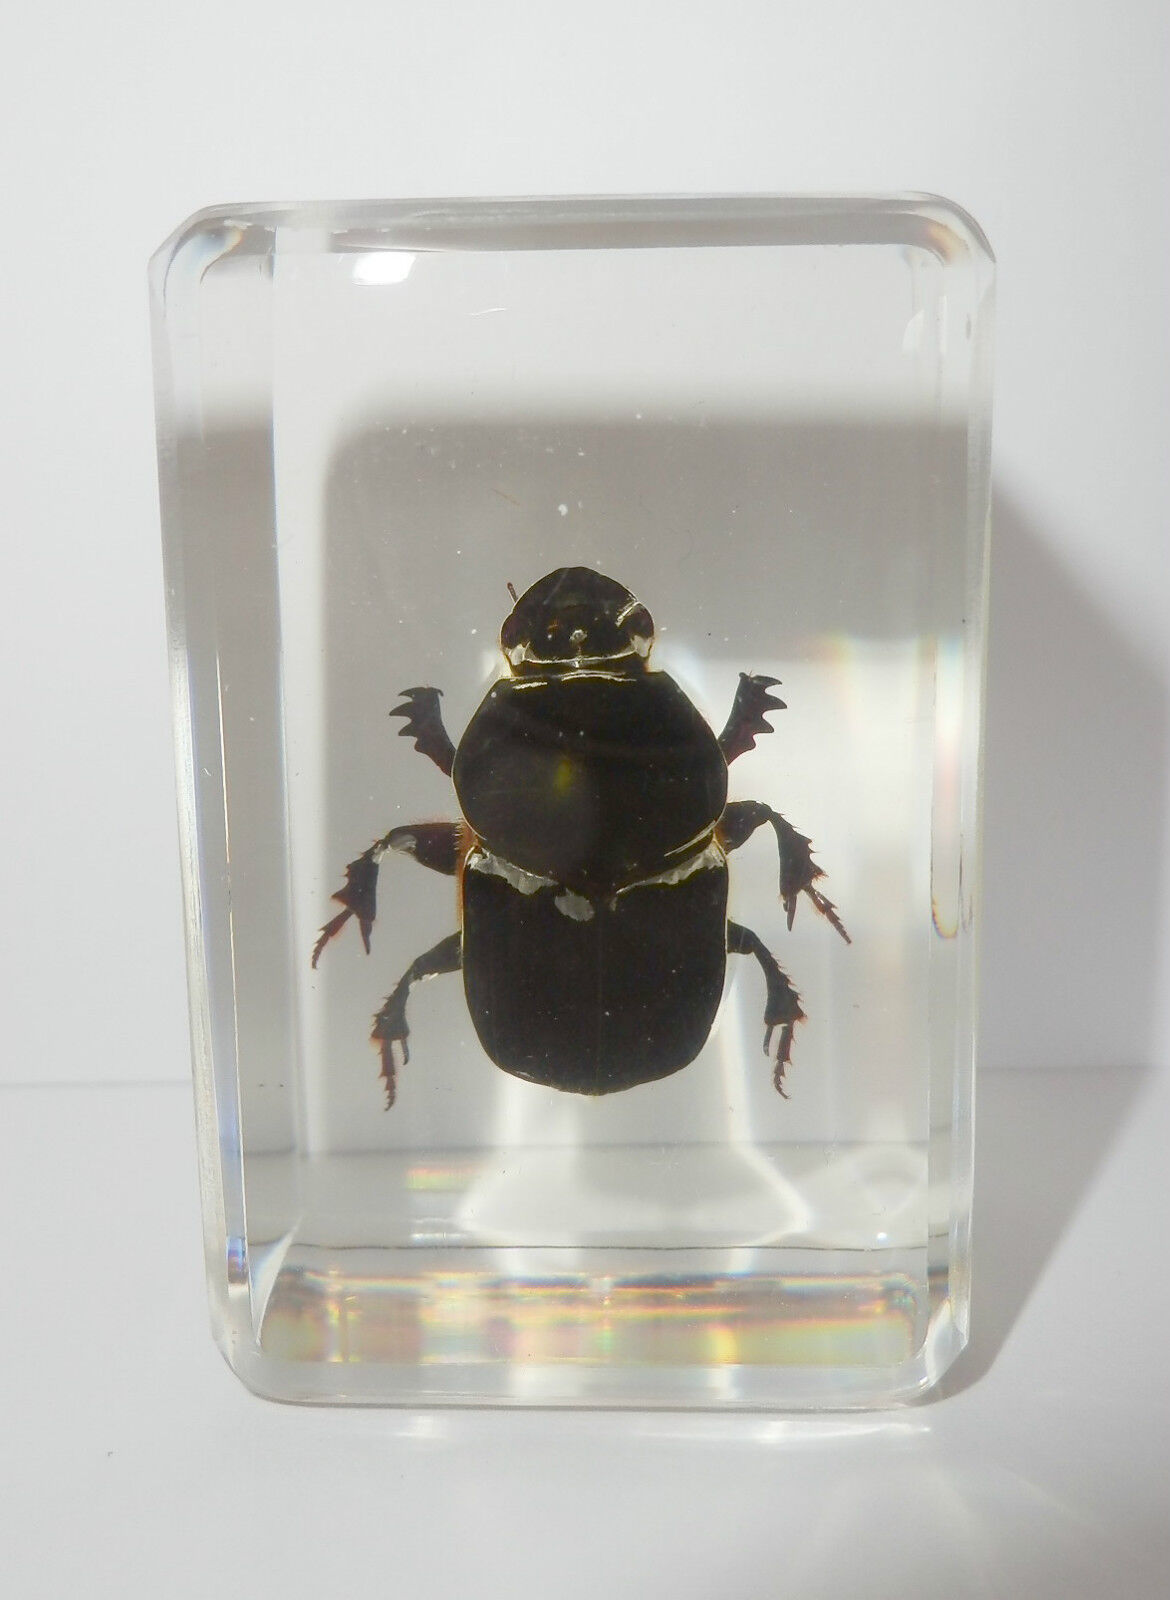 Scarab Dung Beetle in Small Lucite Block Education Insect Specimen TE1